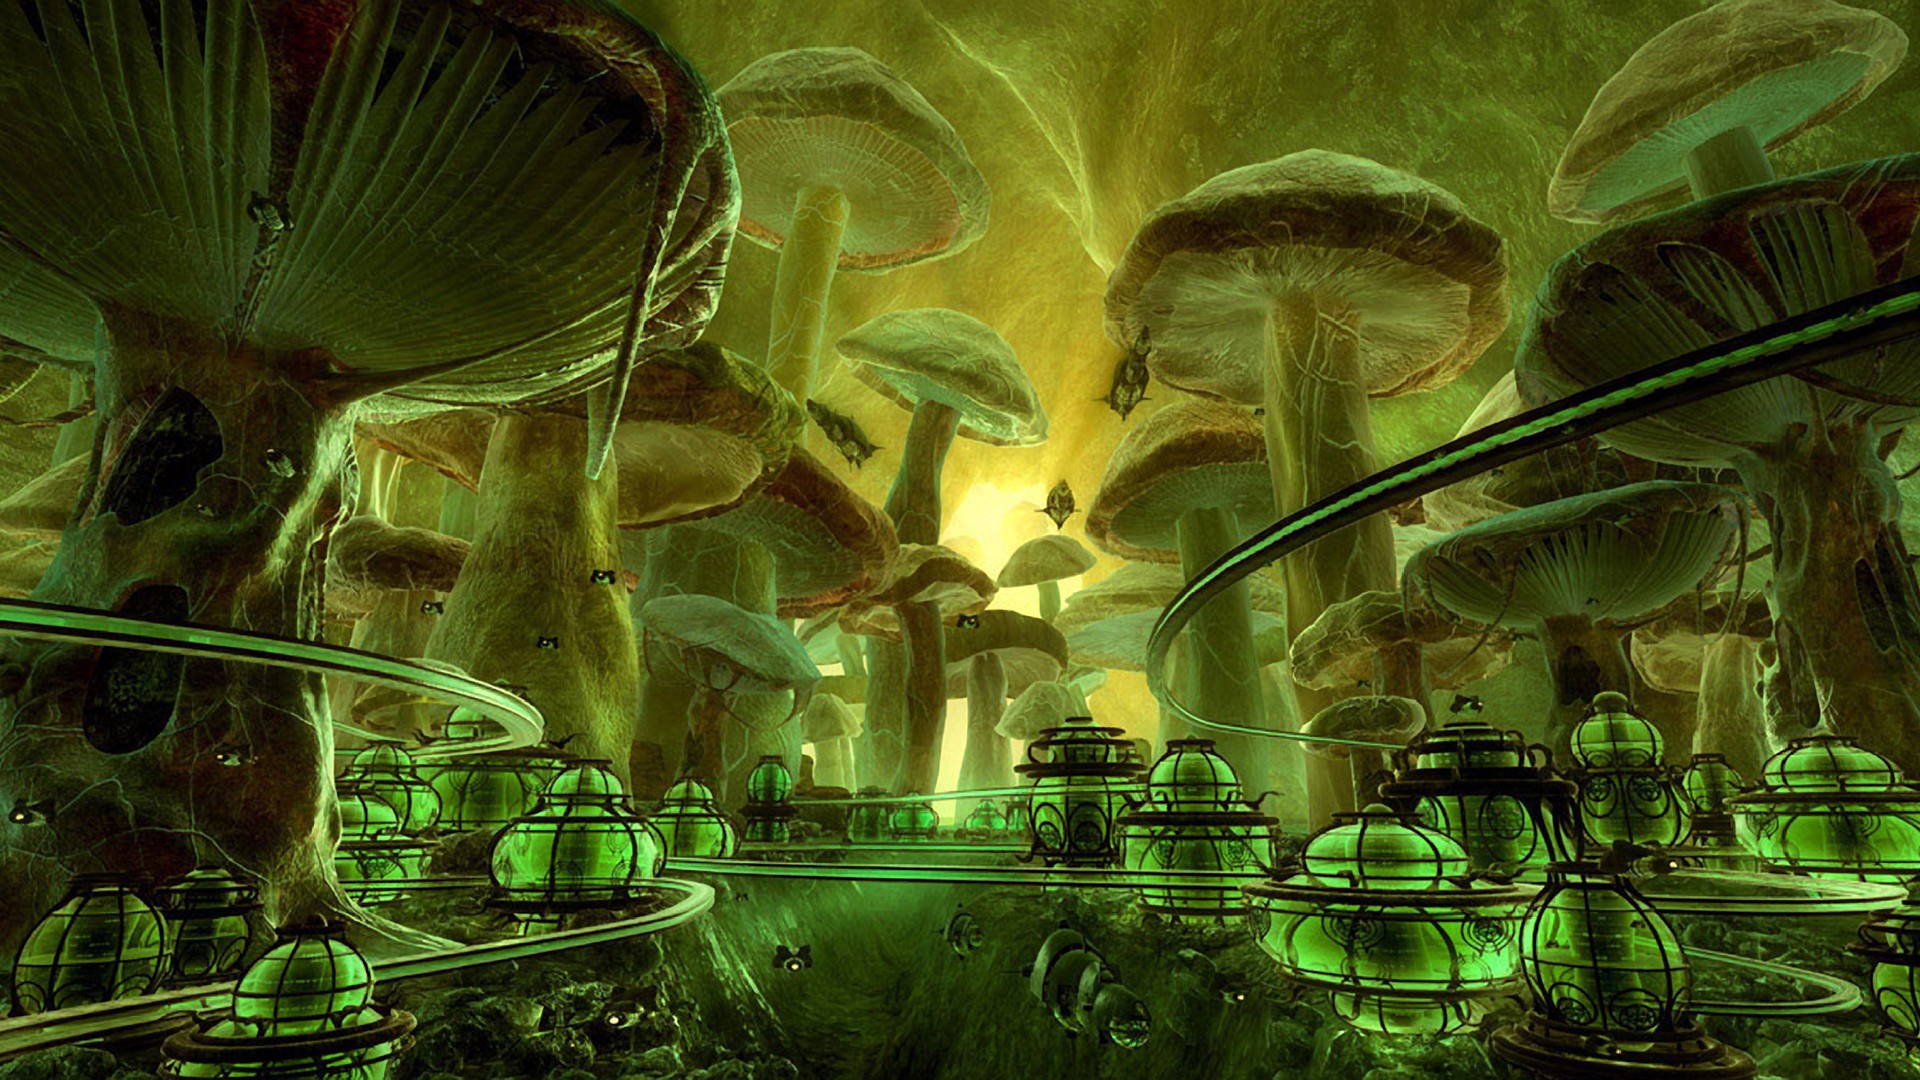 green, Cityscapes, Valley, Mushrooms, Fantasy, Art, Spaceships, City, Lights, Science, Fiction, Vehicles, Transports, Fungus, Cities Wallpaper